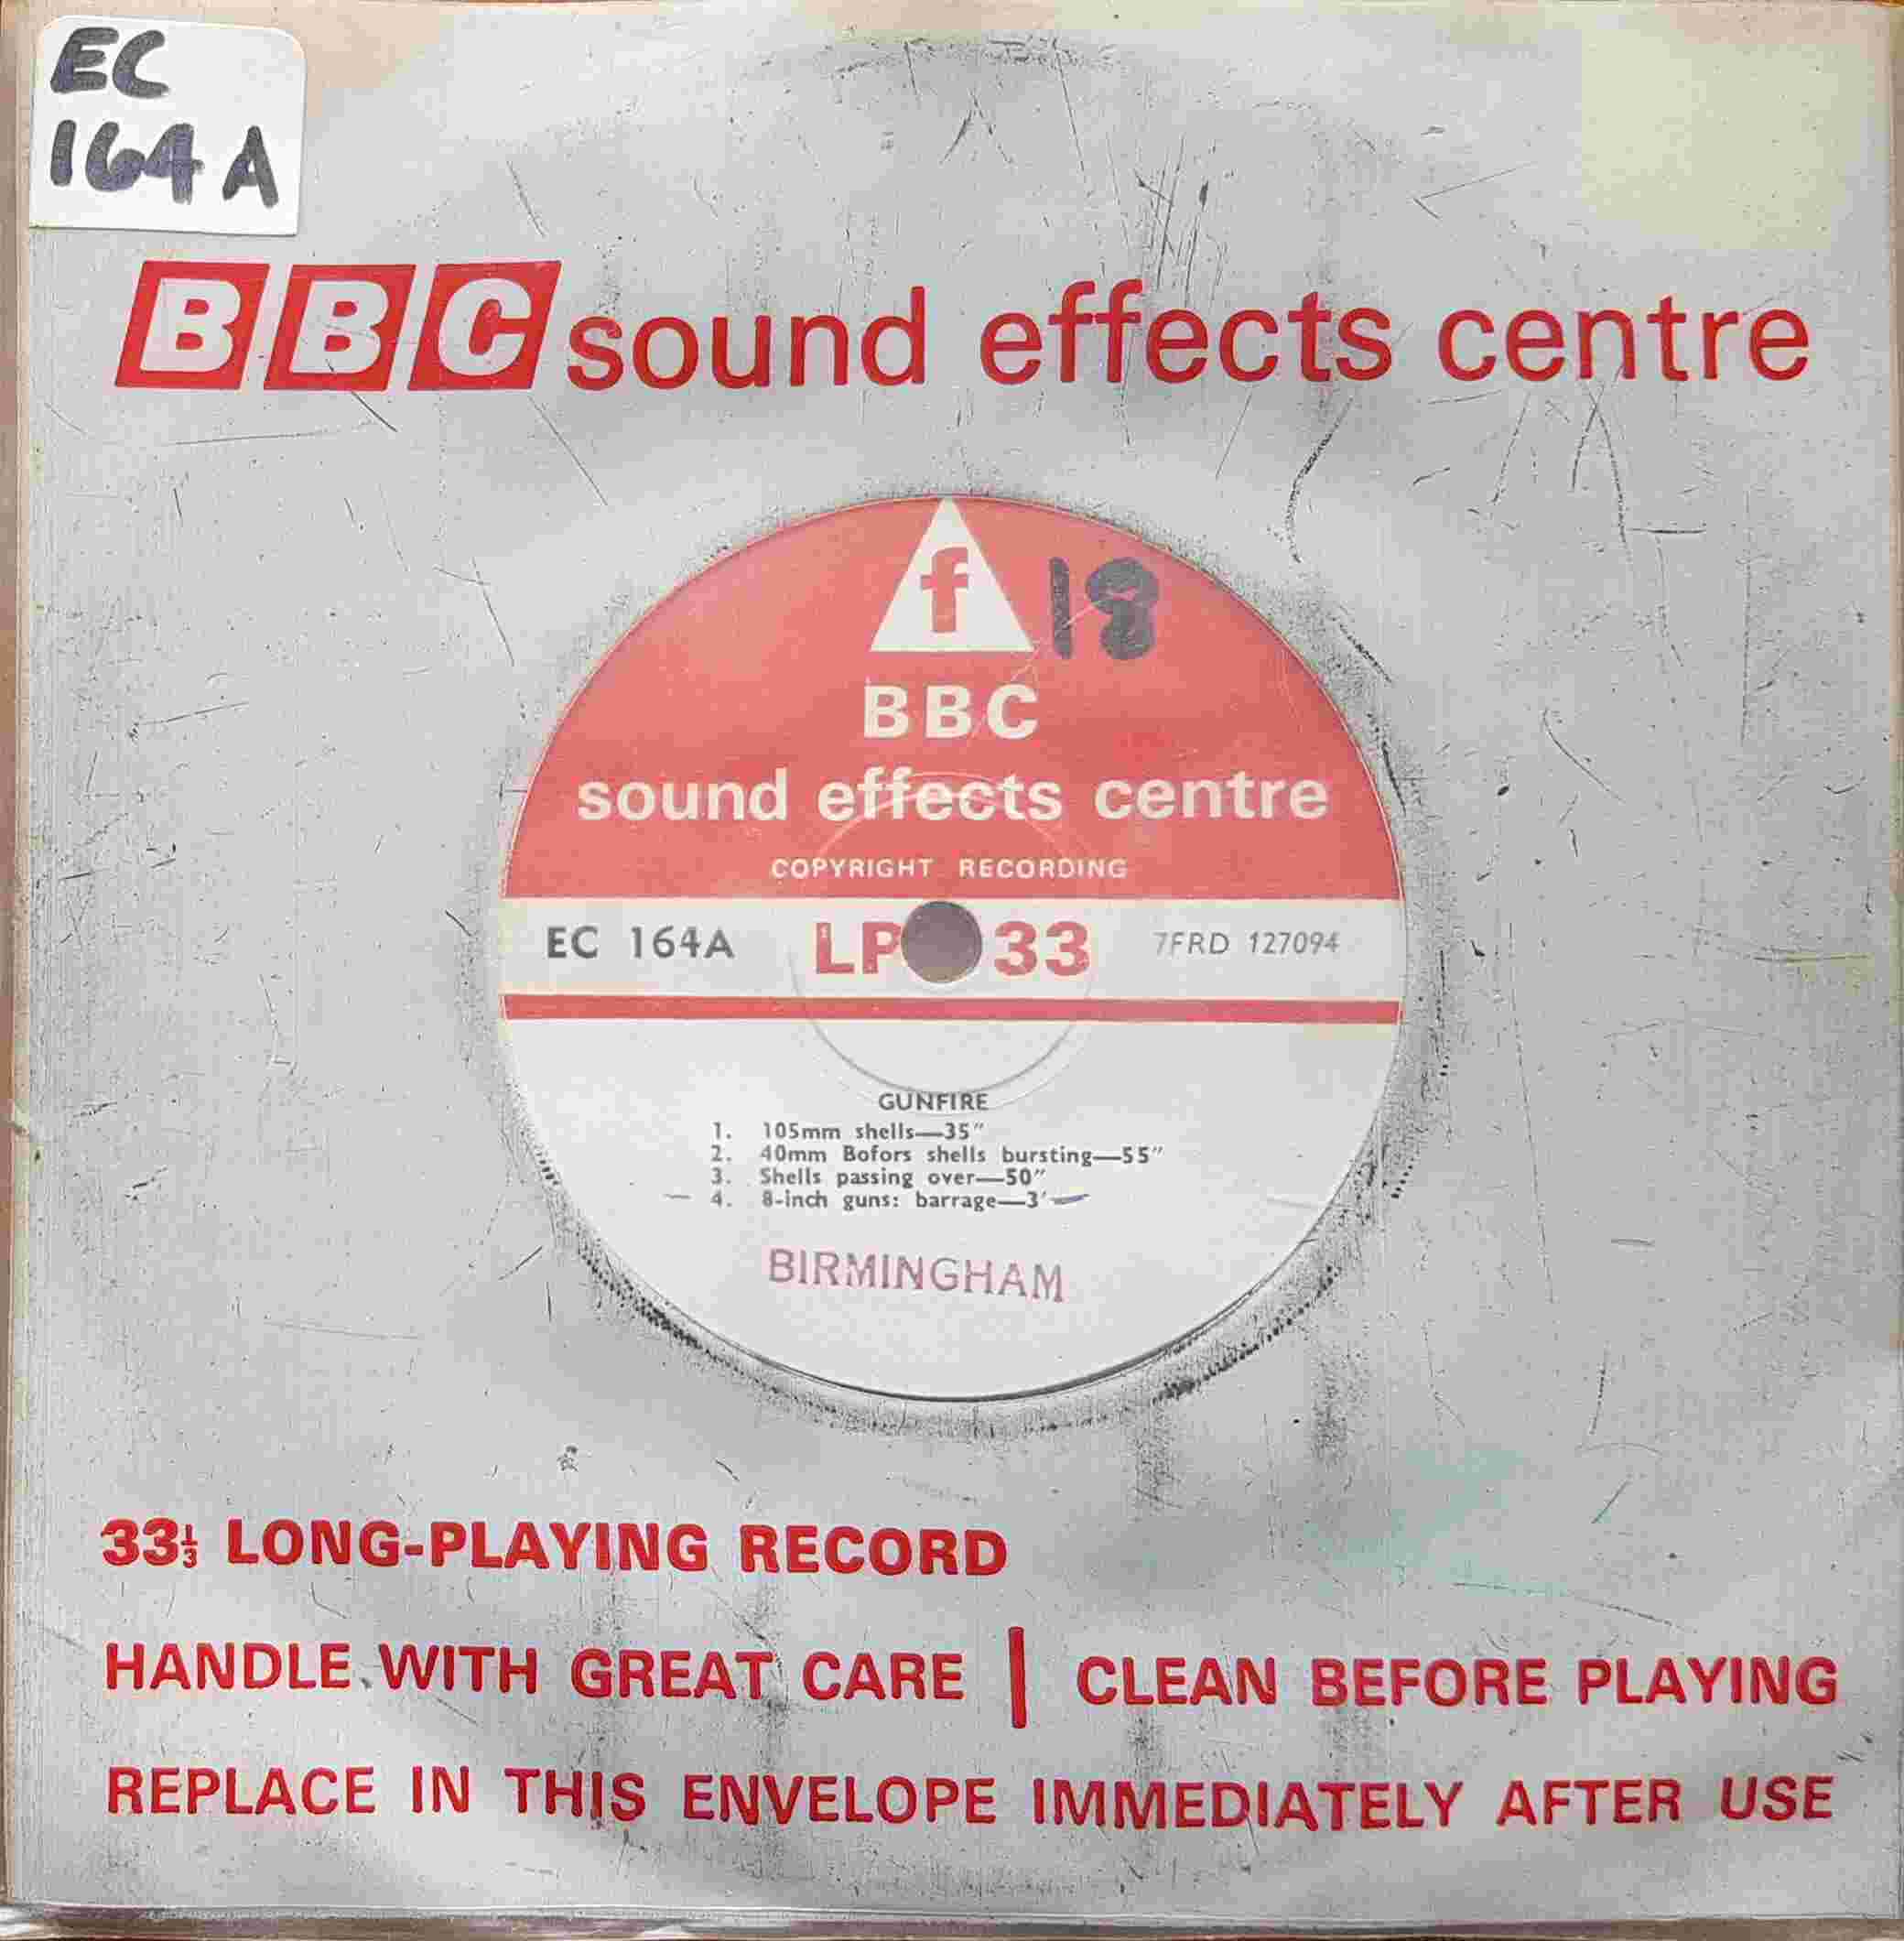 Picture of EC 164A Gunfire by artist Not registered from the BBC singles - Records and Tapes library